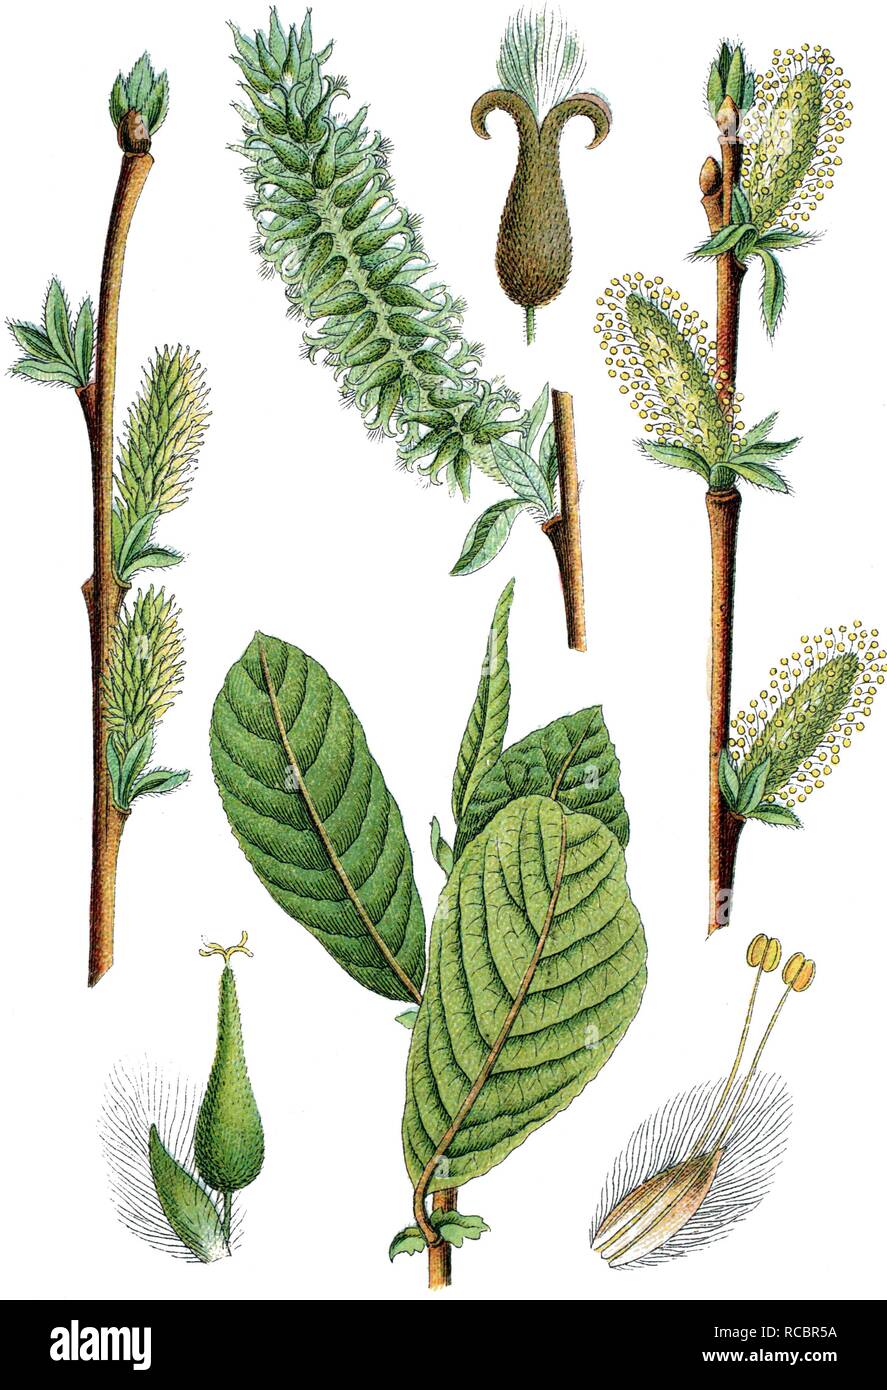 Eared willow (Salix aurita), medicinal plant, crop plant, chromolithography, about 1870 Stock Photo